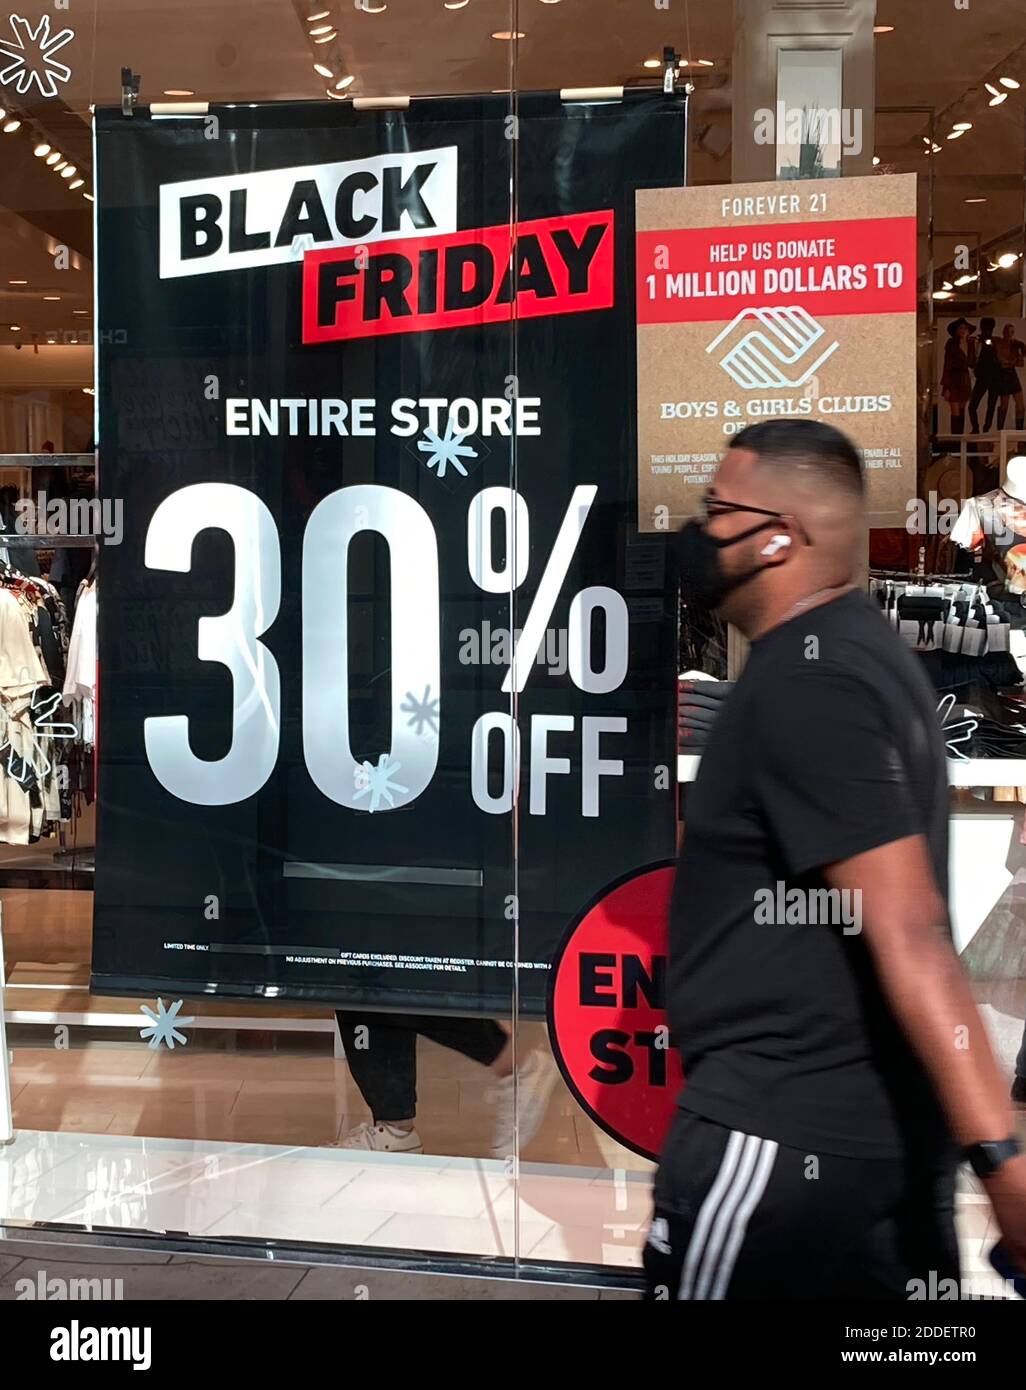 Orlando, United States. 24th Nov, 2020. A shopper wearing a face mask walks  past a Black Friday sale sign in a store window at The Mall at Millenia as  merchants prepare for